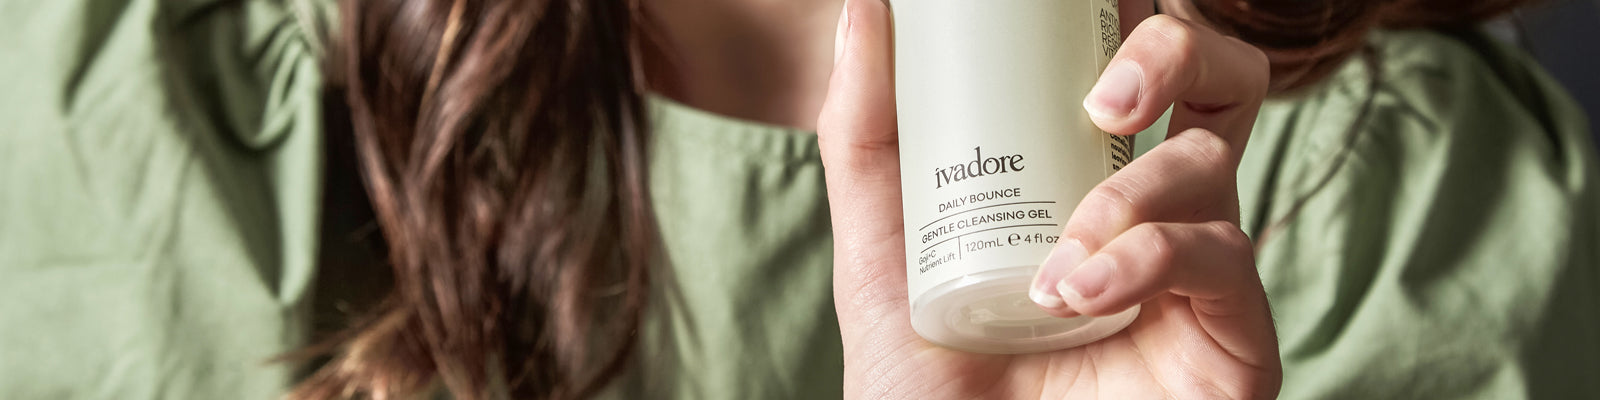 Image shows woman with brown hair in olive green dress holding a bottle of Ivadore Daily Bounce Cleansing Gel